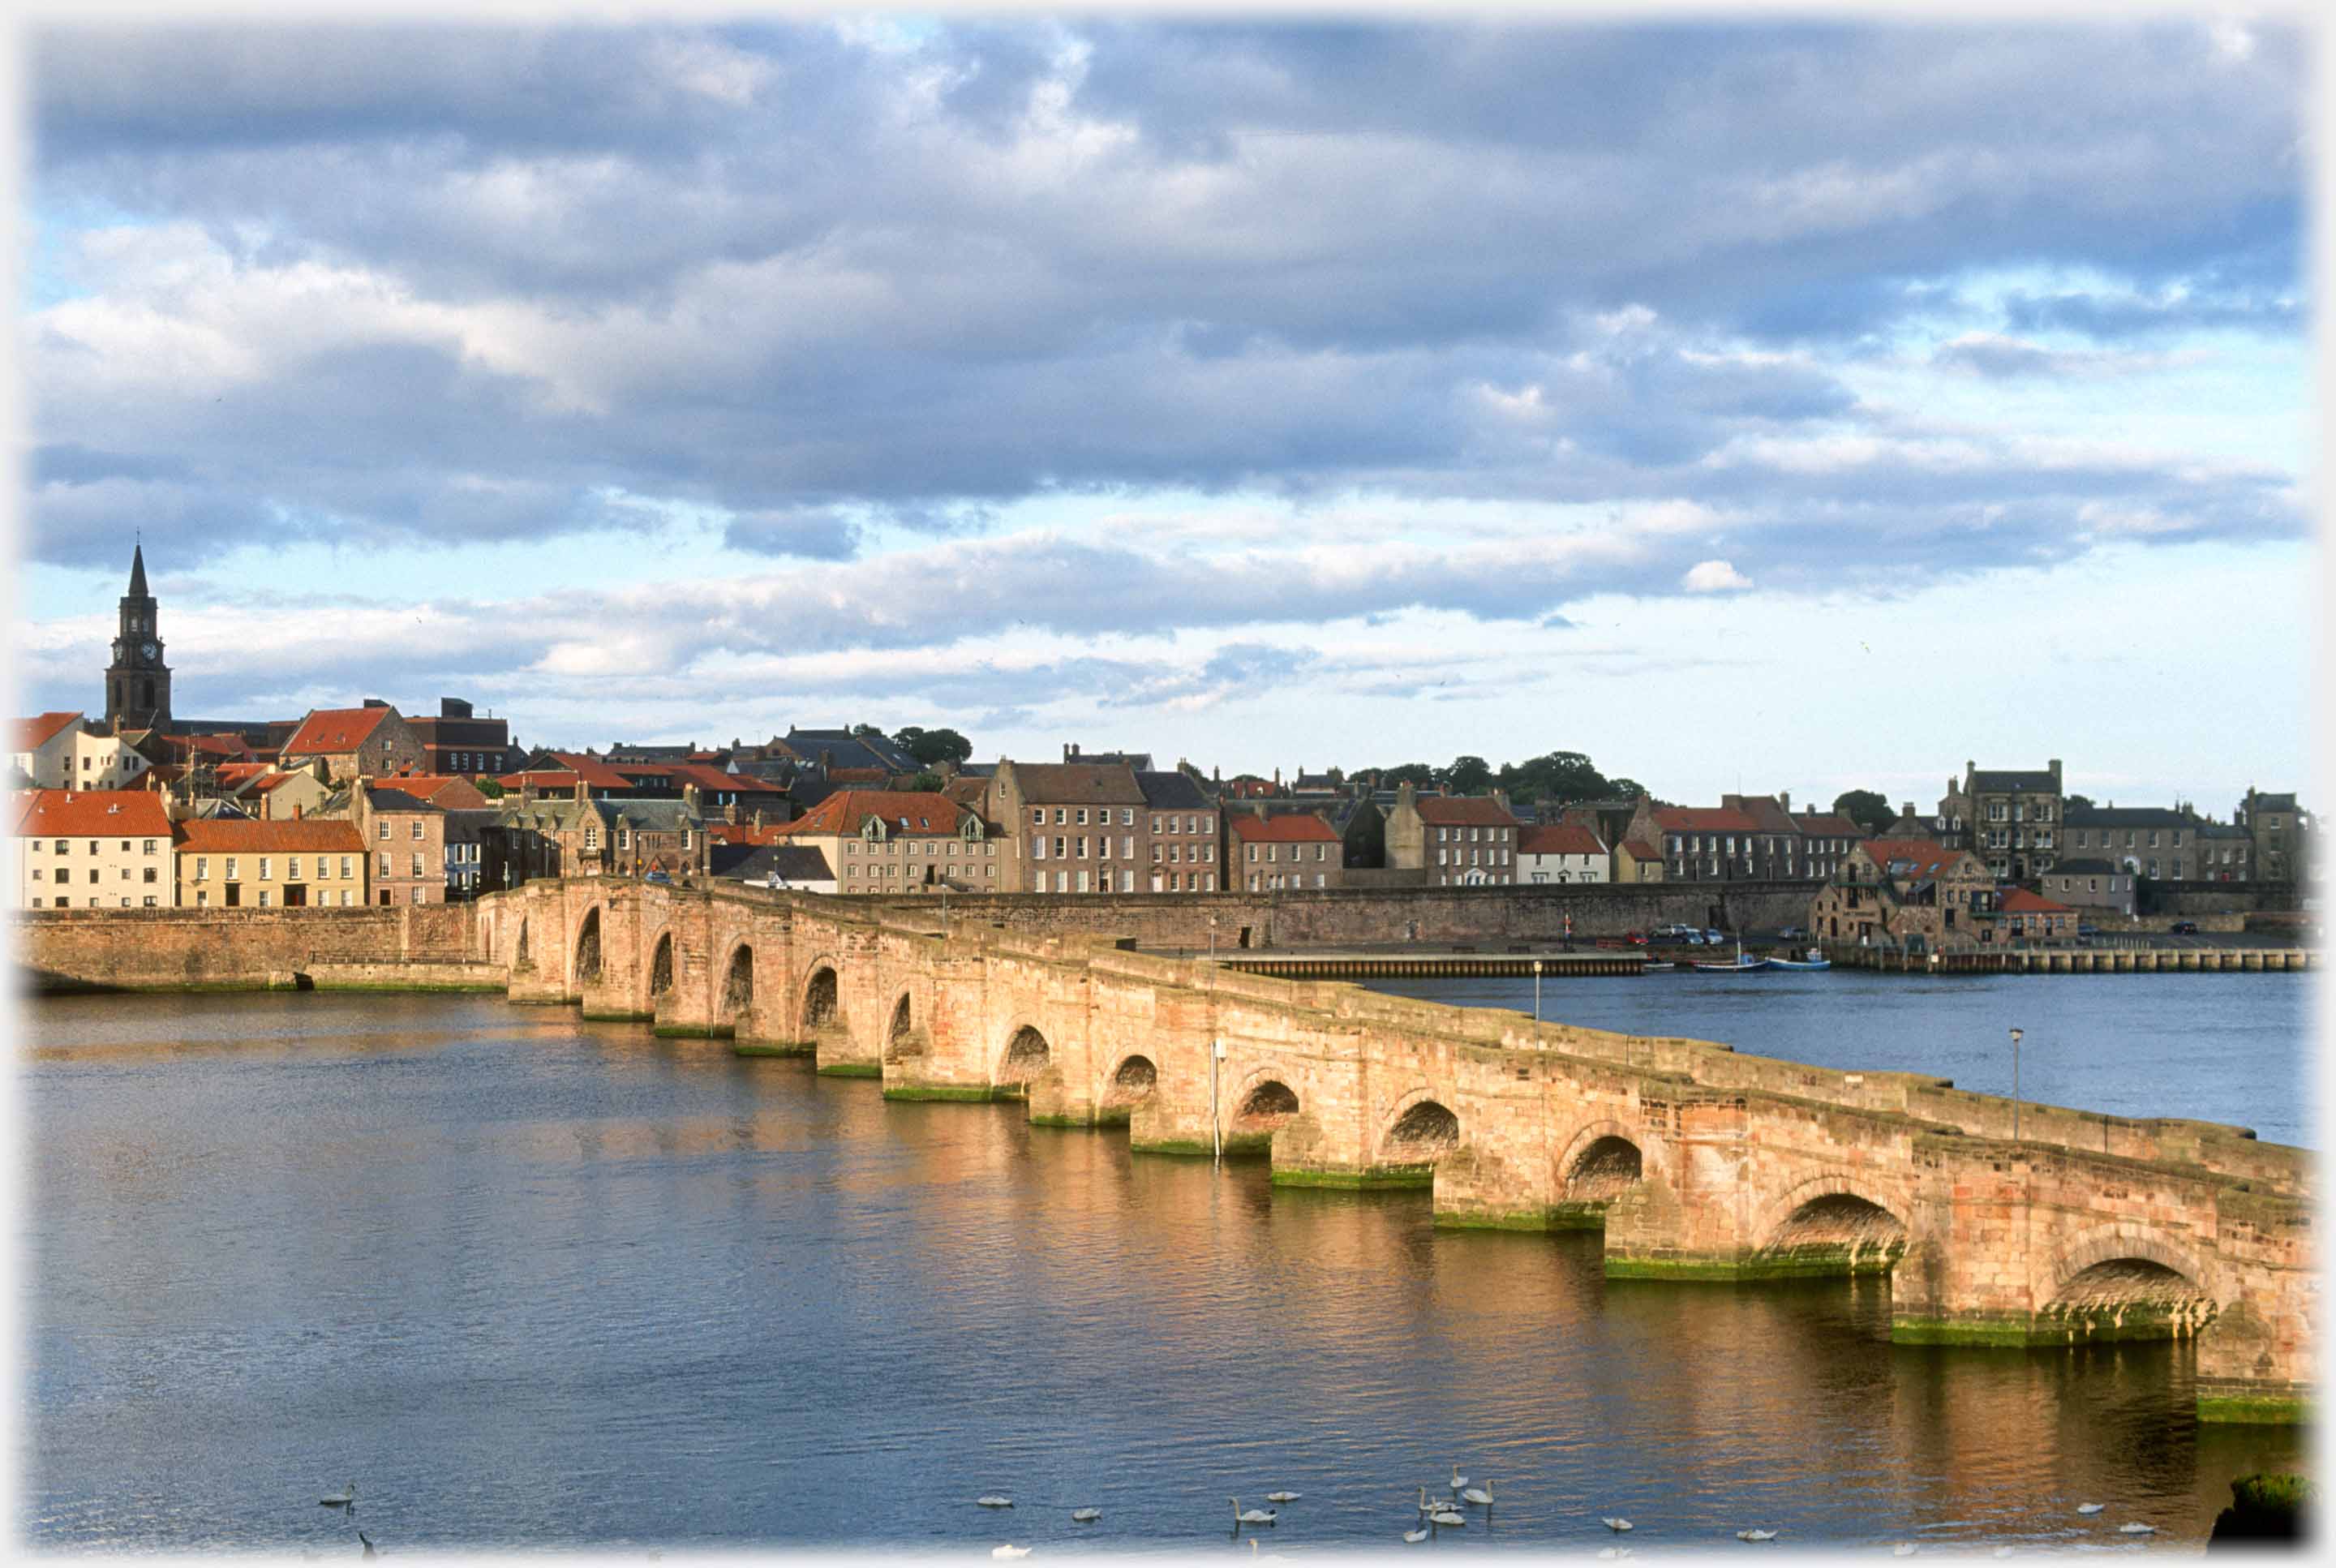 Berwick town with the old bridge running to it caught in the evening sun.